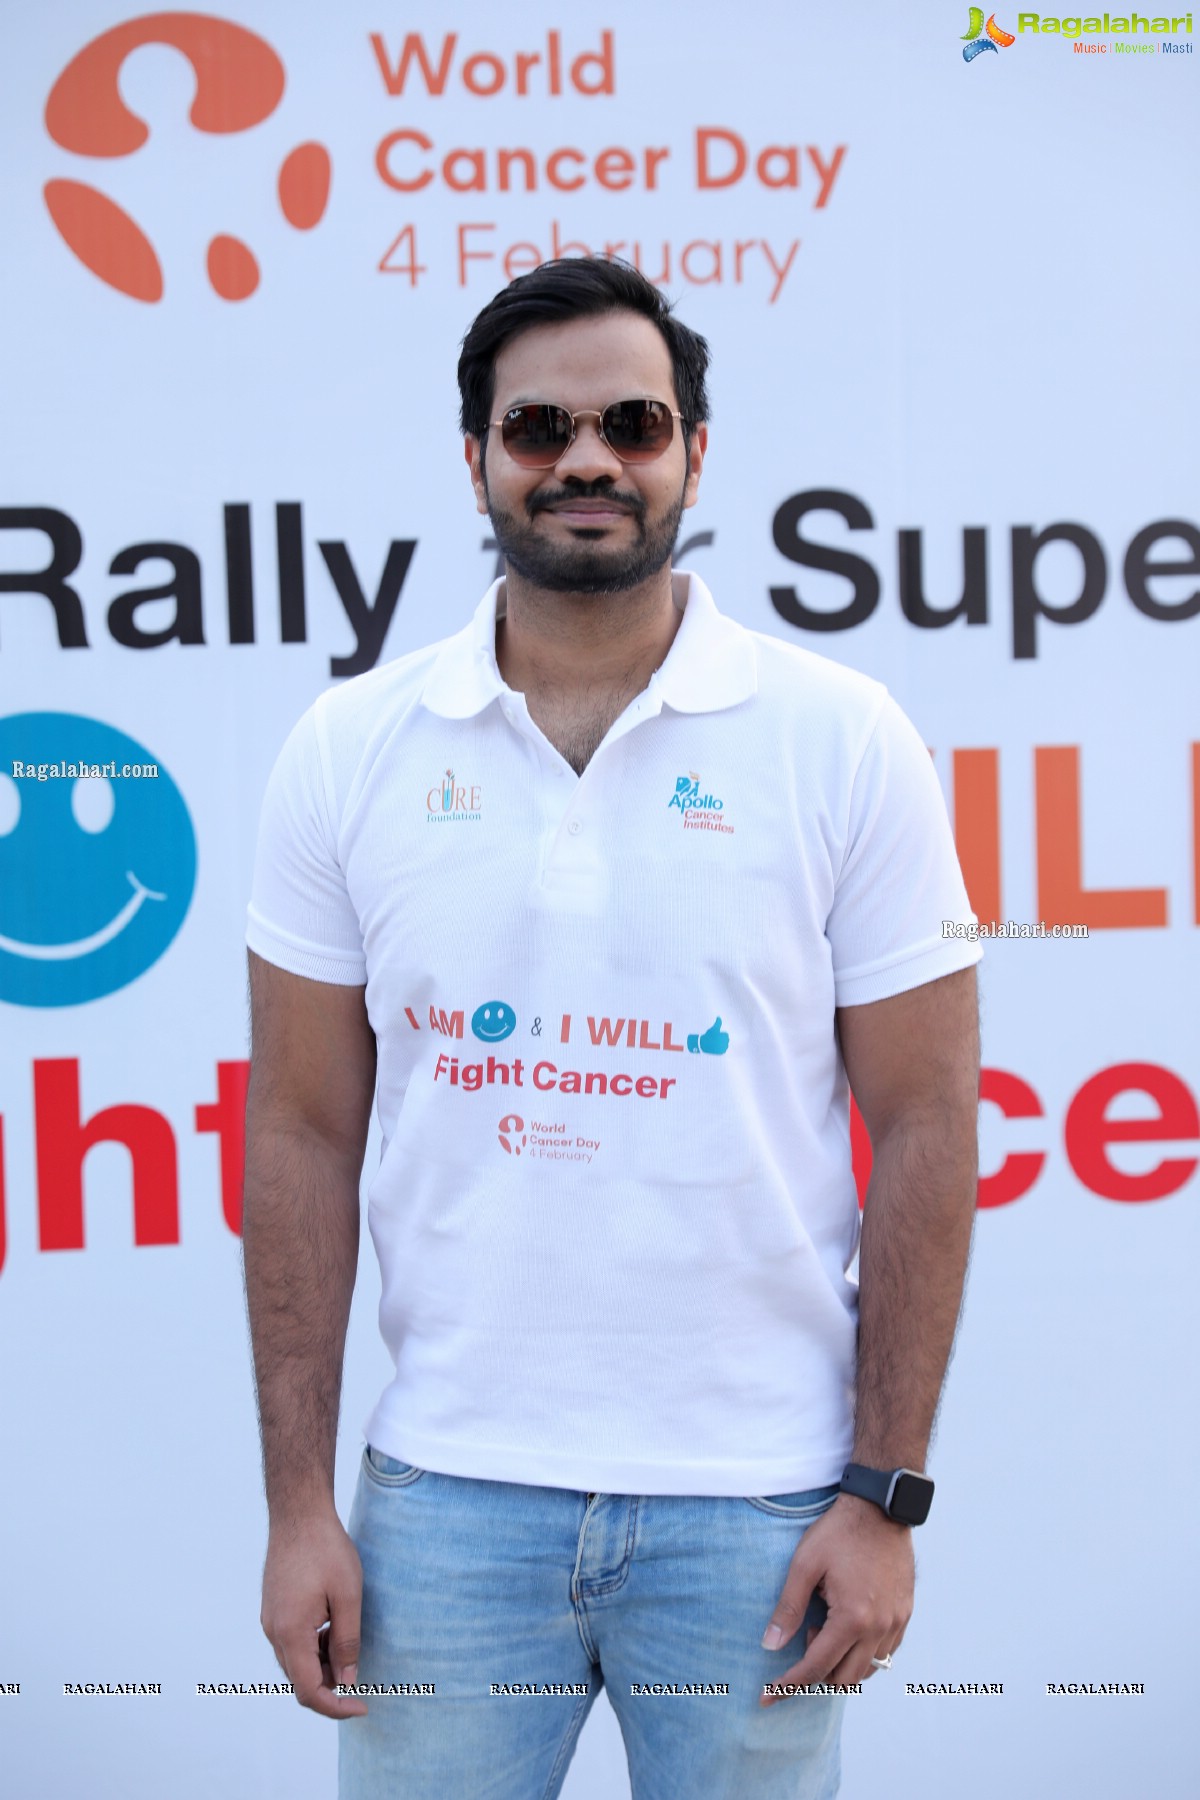 Cancer Awareness Super Car Rally by Apollo Cancer Institutes & Cure Foundation